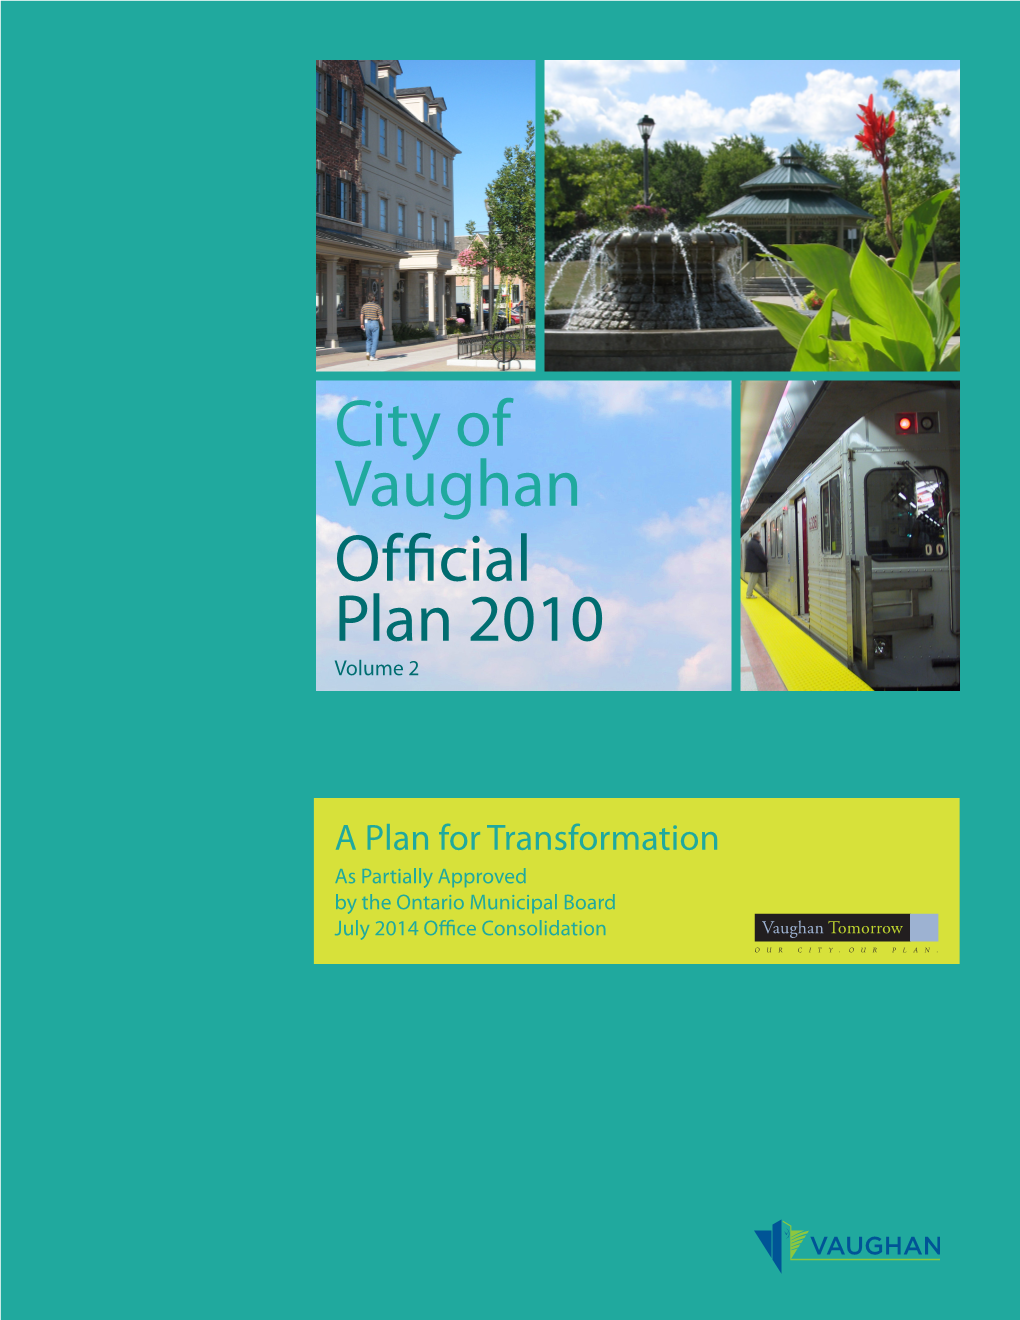 City of Vaughan Official Plan 2010 Volume 2